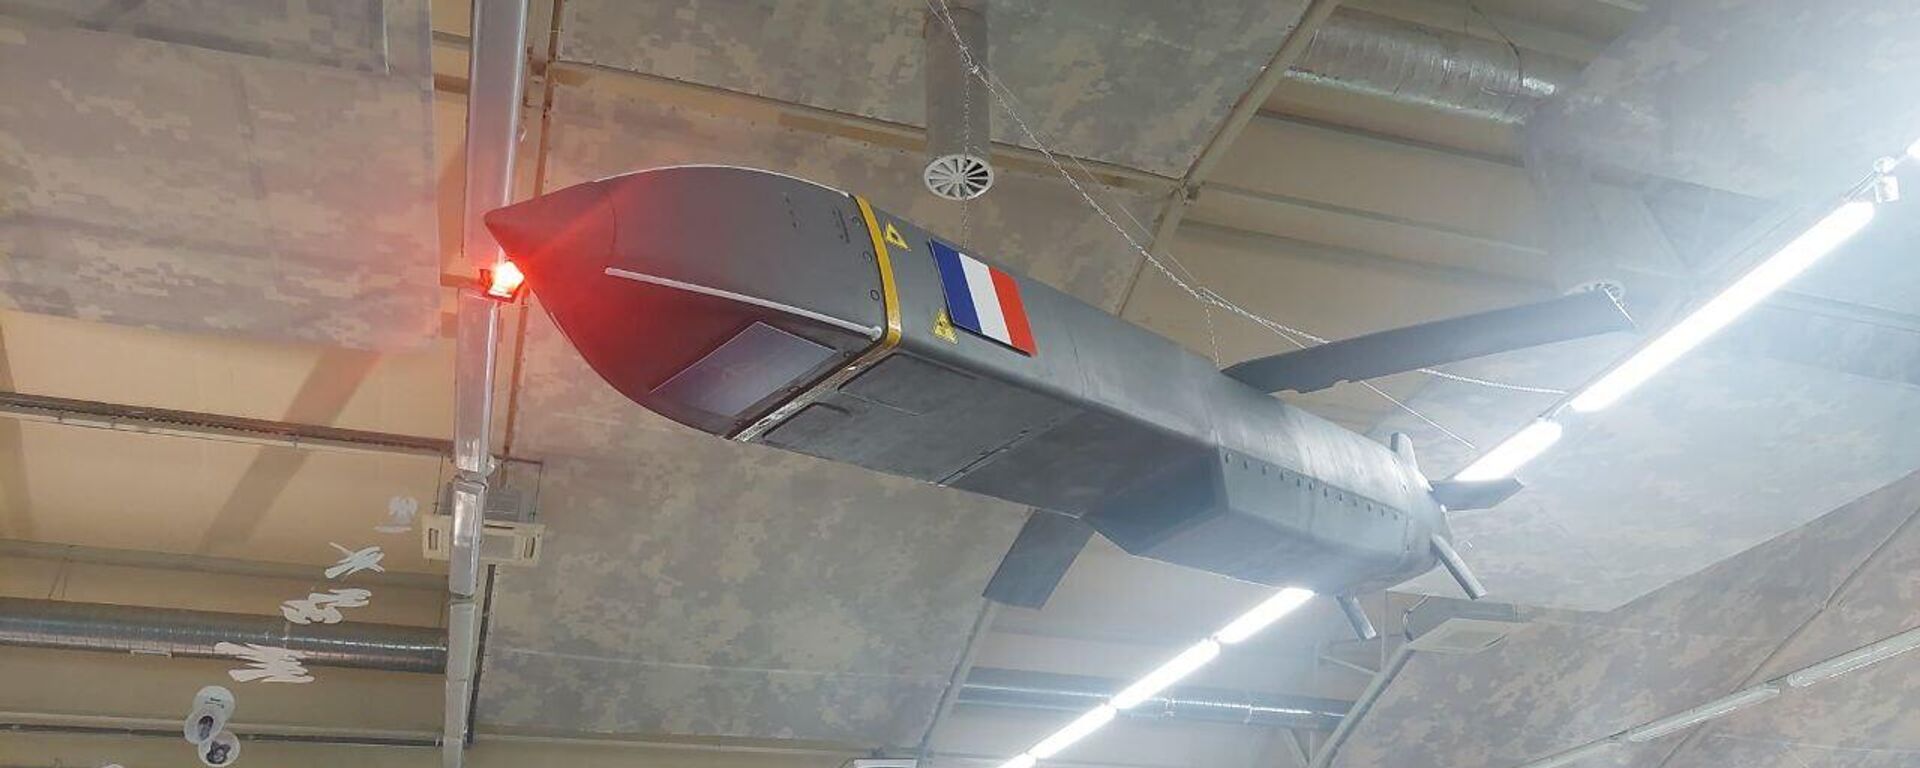 A captured Storm Shadow missile (French - SCALP), presented at an exhibition as part of the International Military-Technical Forum Army-2023 at the Patriot Convention and Exhibition Center. - Sputnik Africa, 1920, 18.09.2023